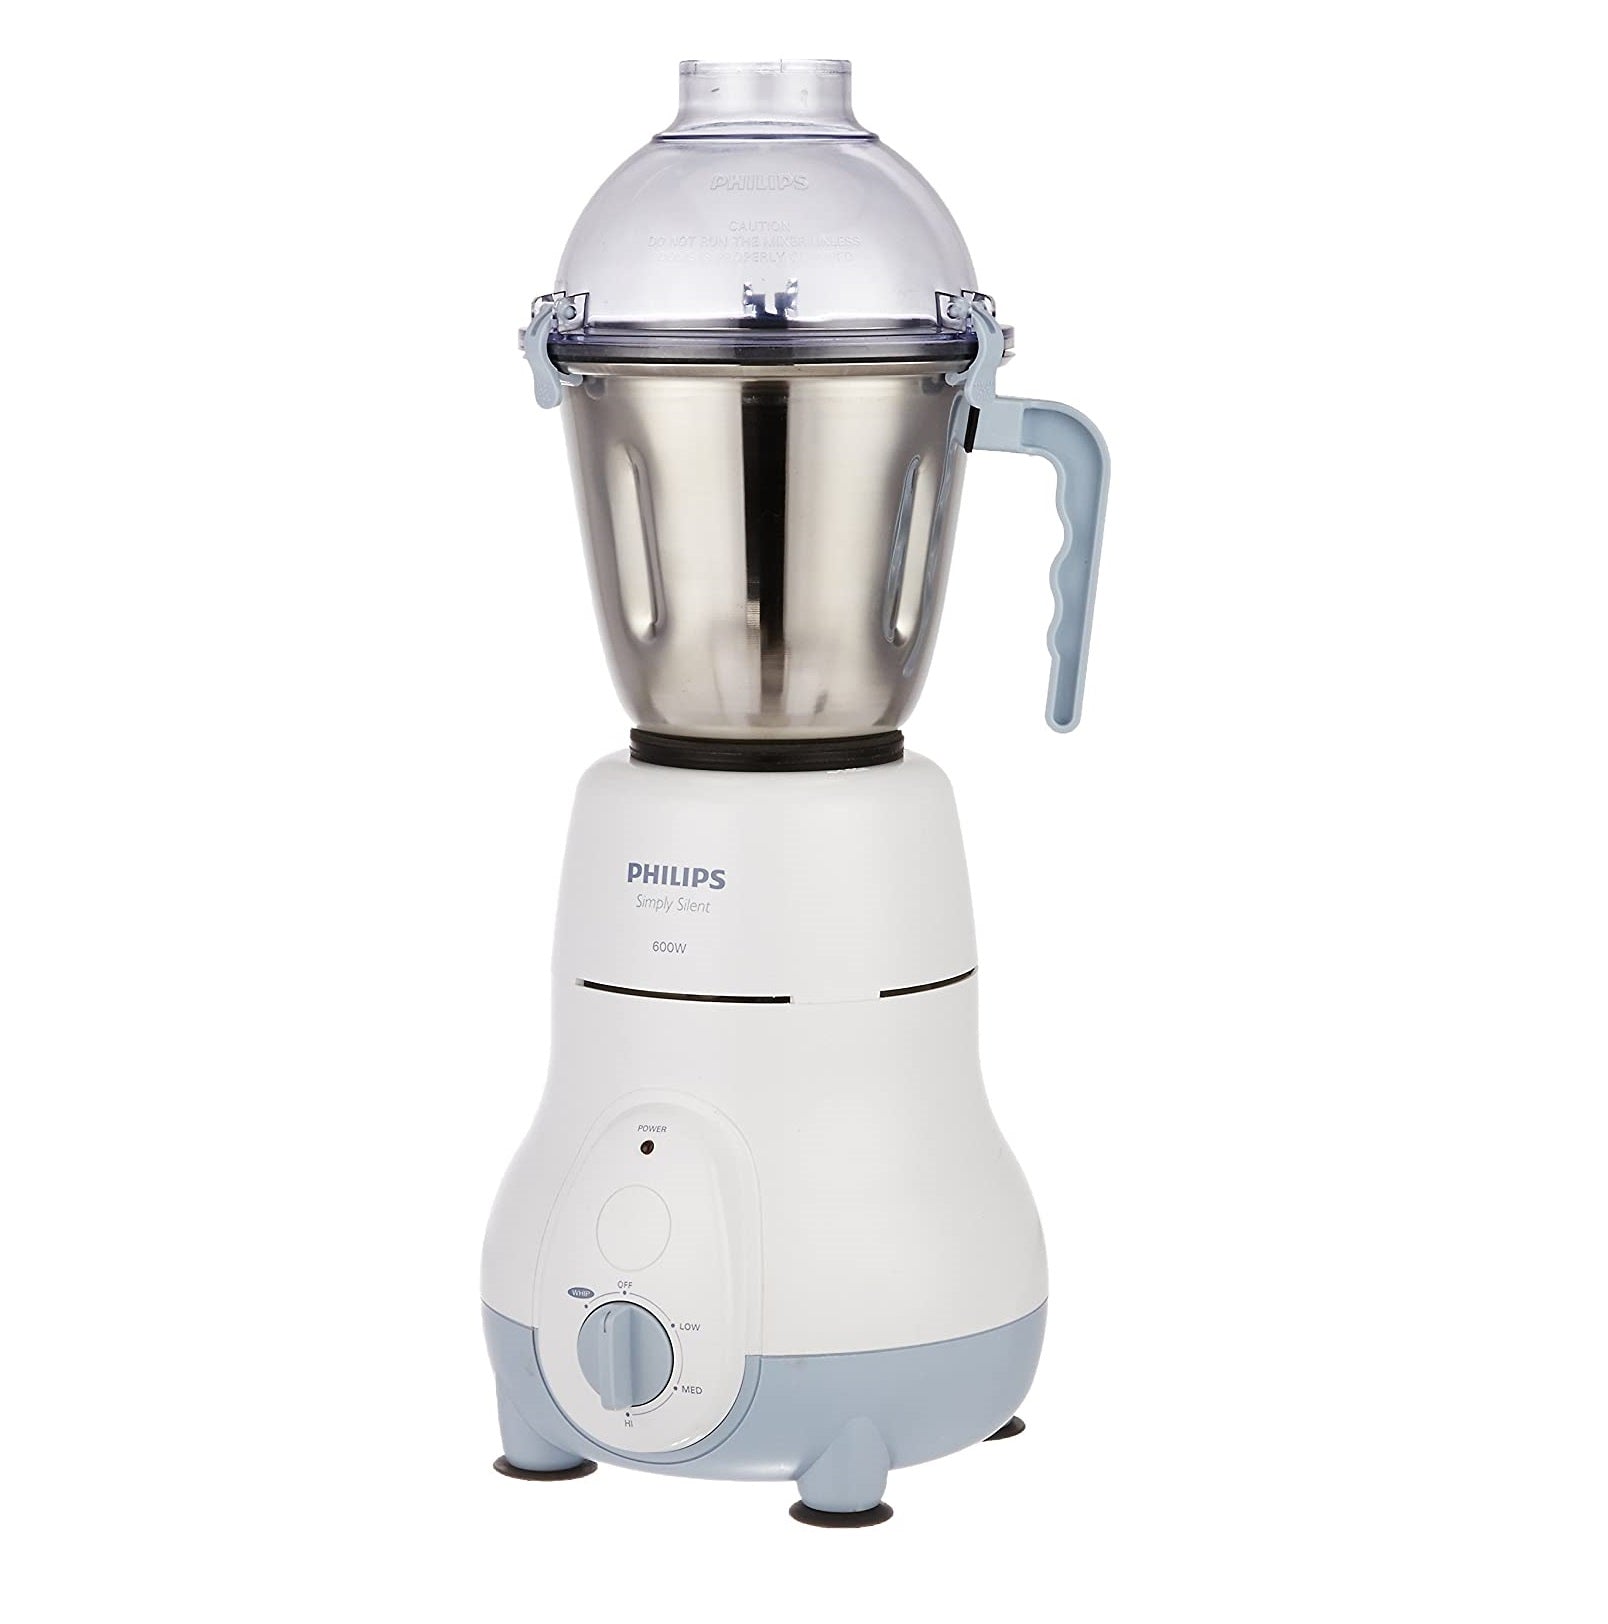 Independent Review Of Phillips Super Silent Mixer Grinder/Is This Really  Super Silent ? You decide 